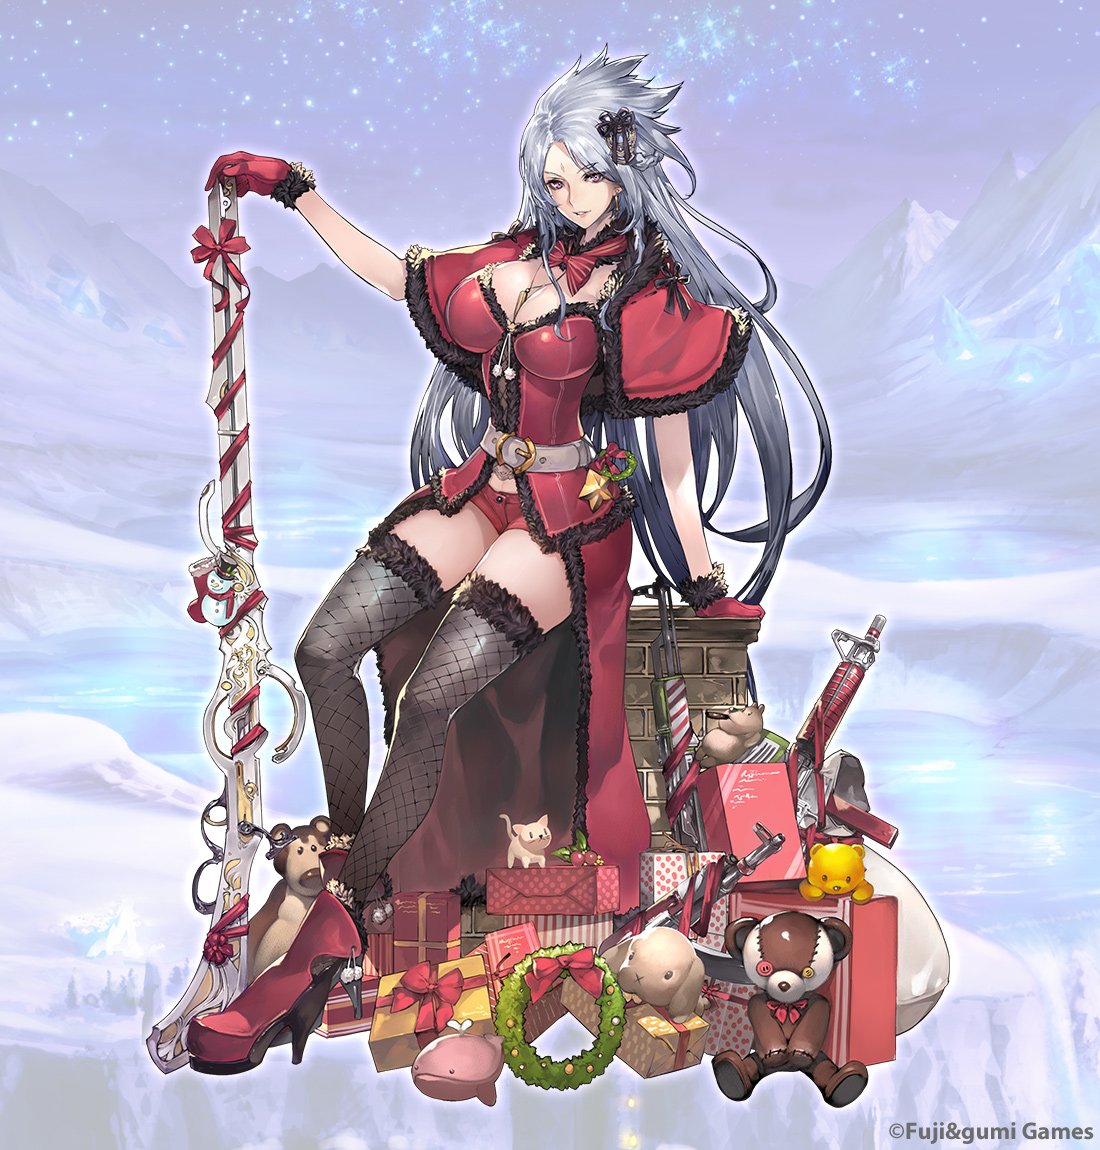 1girl background belt black_fur bow bowtie breasts brionac_(phantom_of_the_kill) chimney choker christmas christmas_stocking cleavage company_name fishnet_legwear fishnets gift gun hair_ornament high_heels jewelry lake large_breasts long_hair mountain musket necklace official_art phantom_of_the_kill ribbon rifle shorts sleeveless snow snowman solo star_(sky) star_ornament stuffed_animal stuffed_toy teddy_bear thigh-highs toy valley very_long_hair weapon wrapped wreath